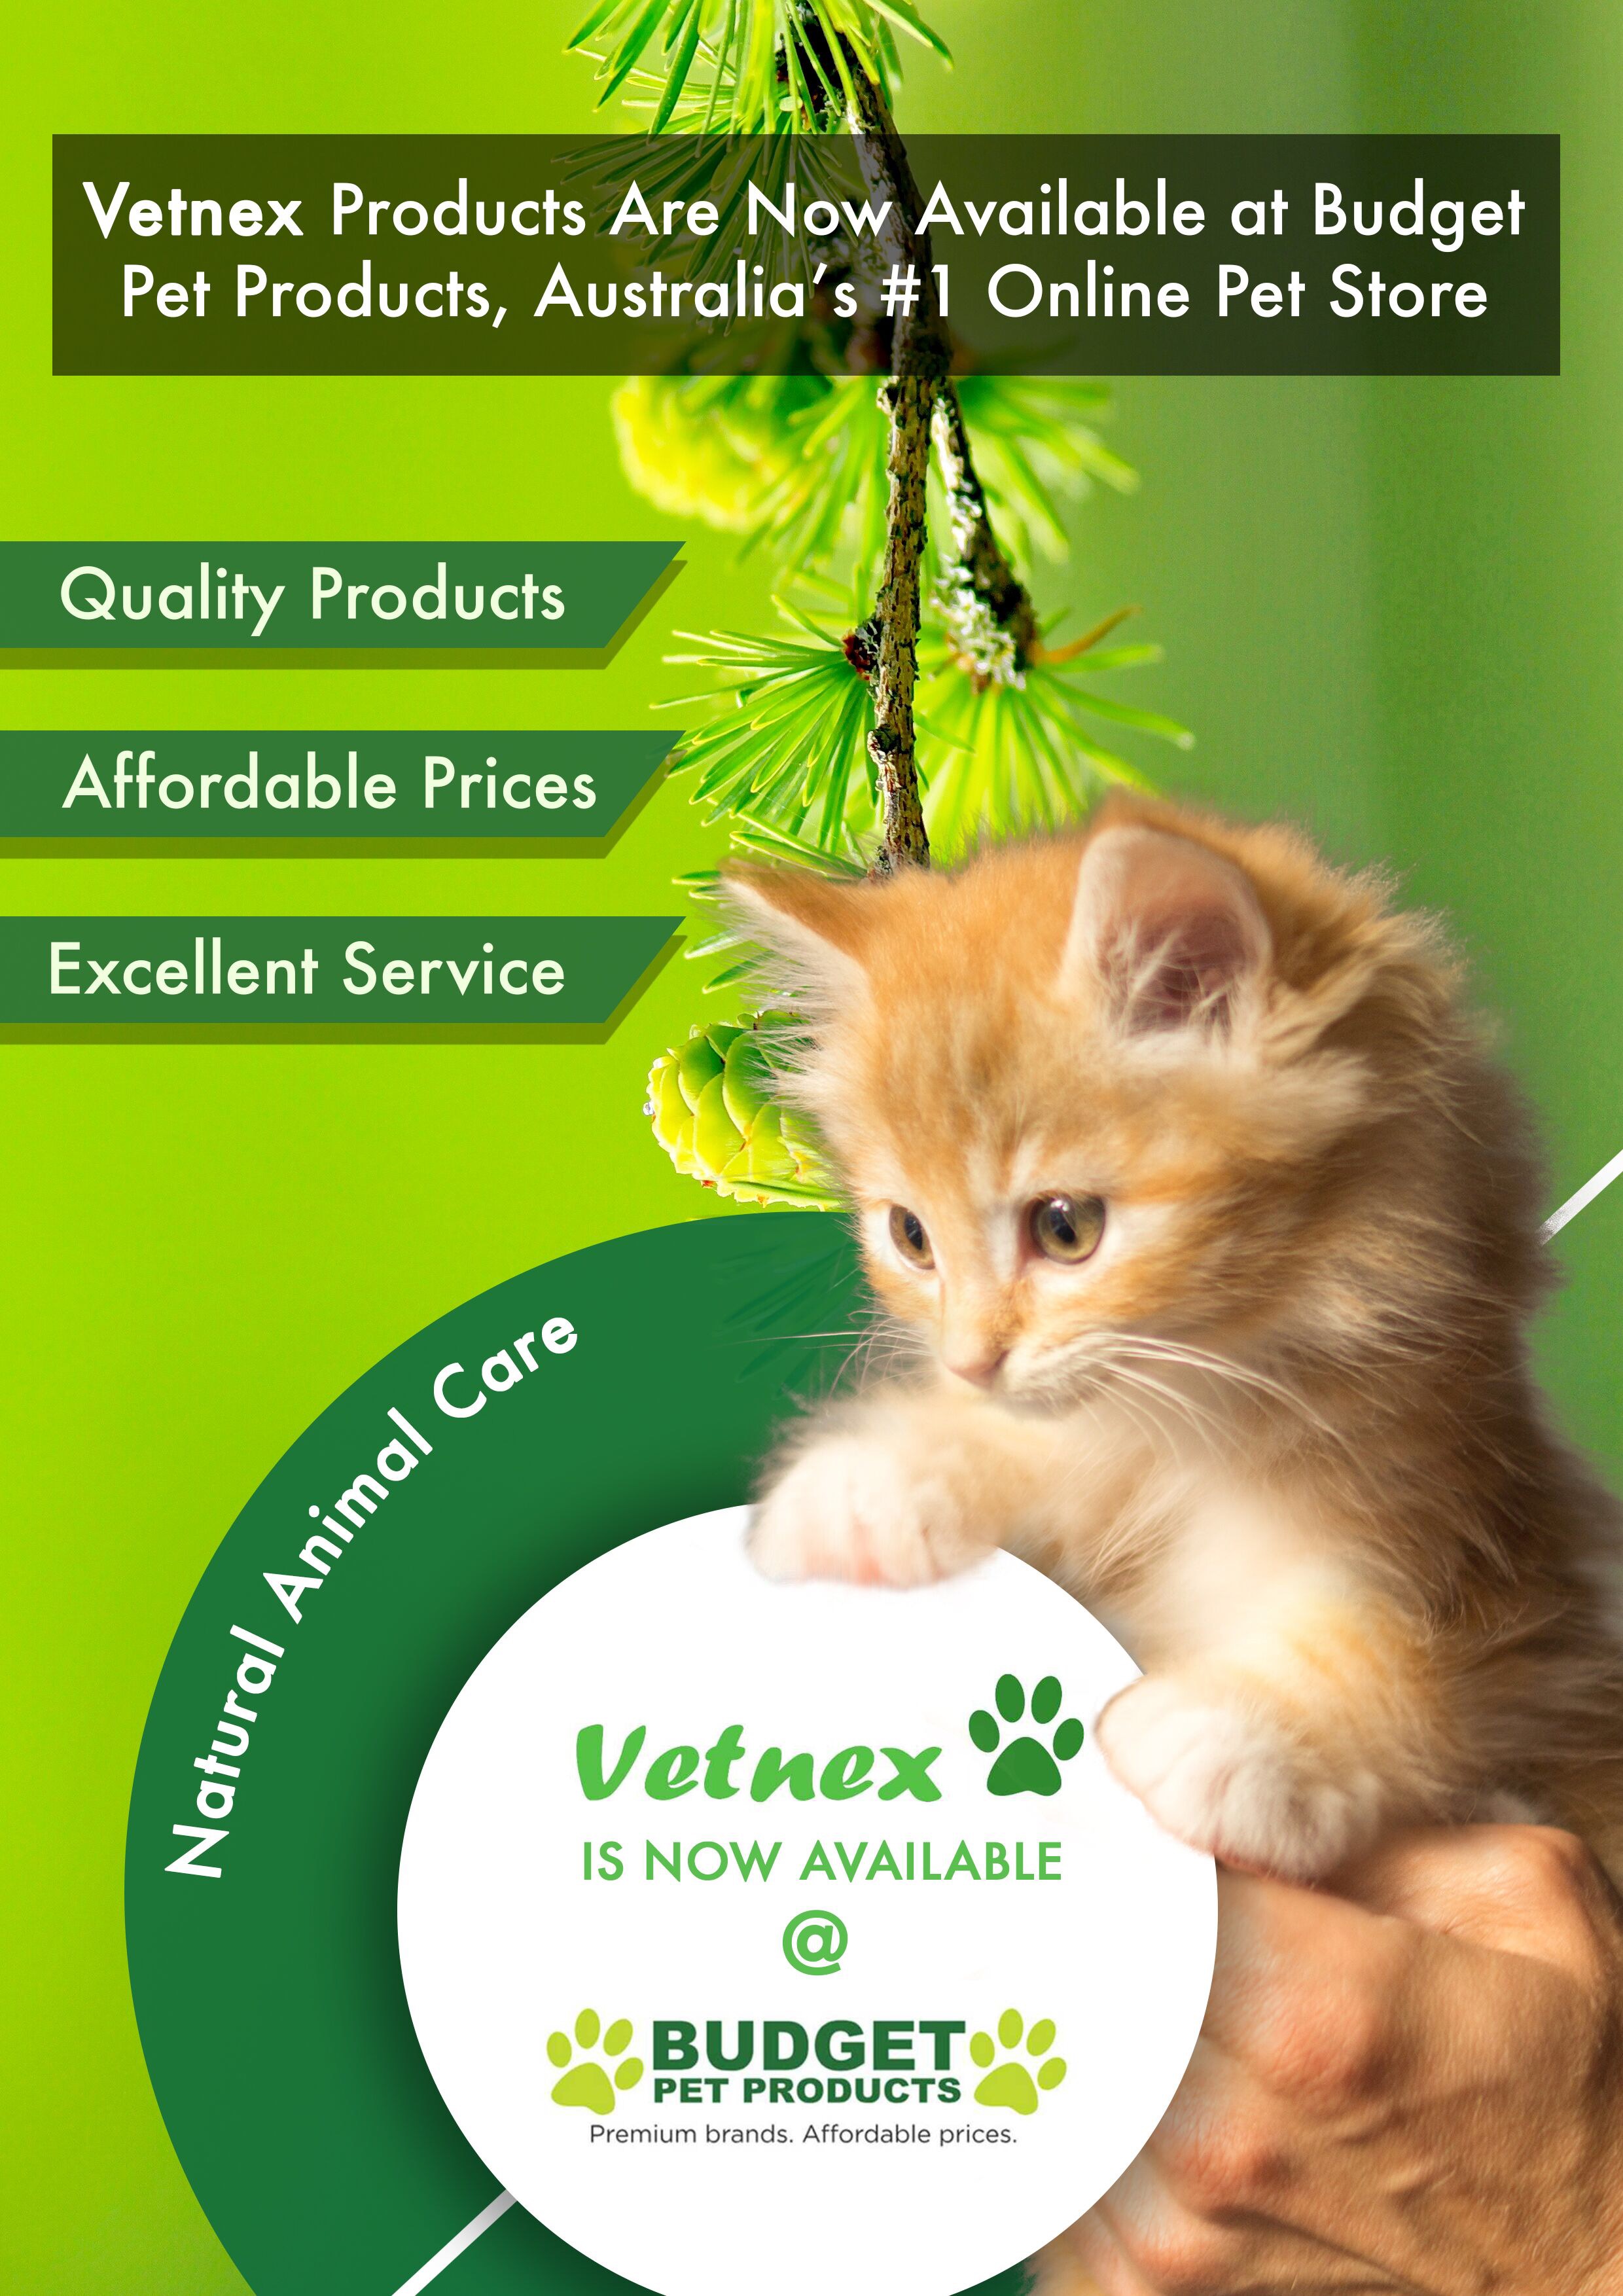 Vetnex Products Are Now Available at Budget Pet Products, Australia’s #1 Online Pet Store